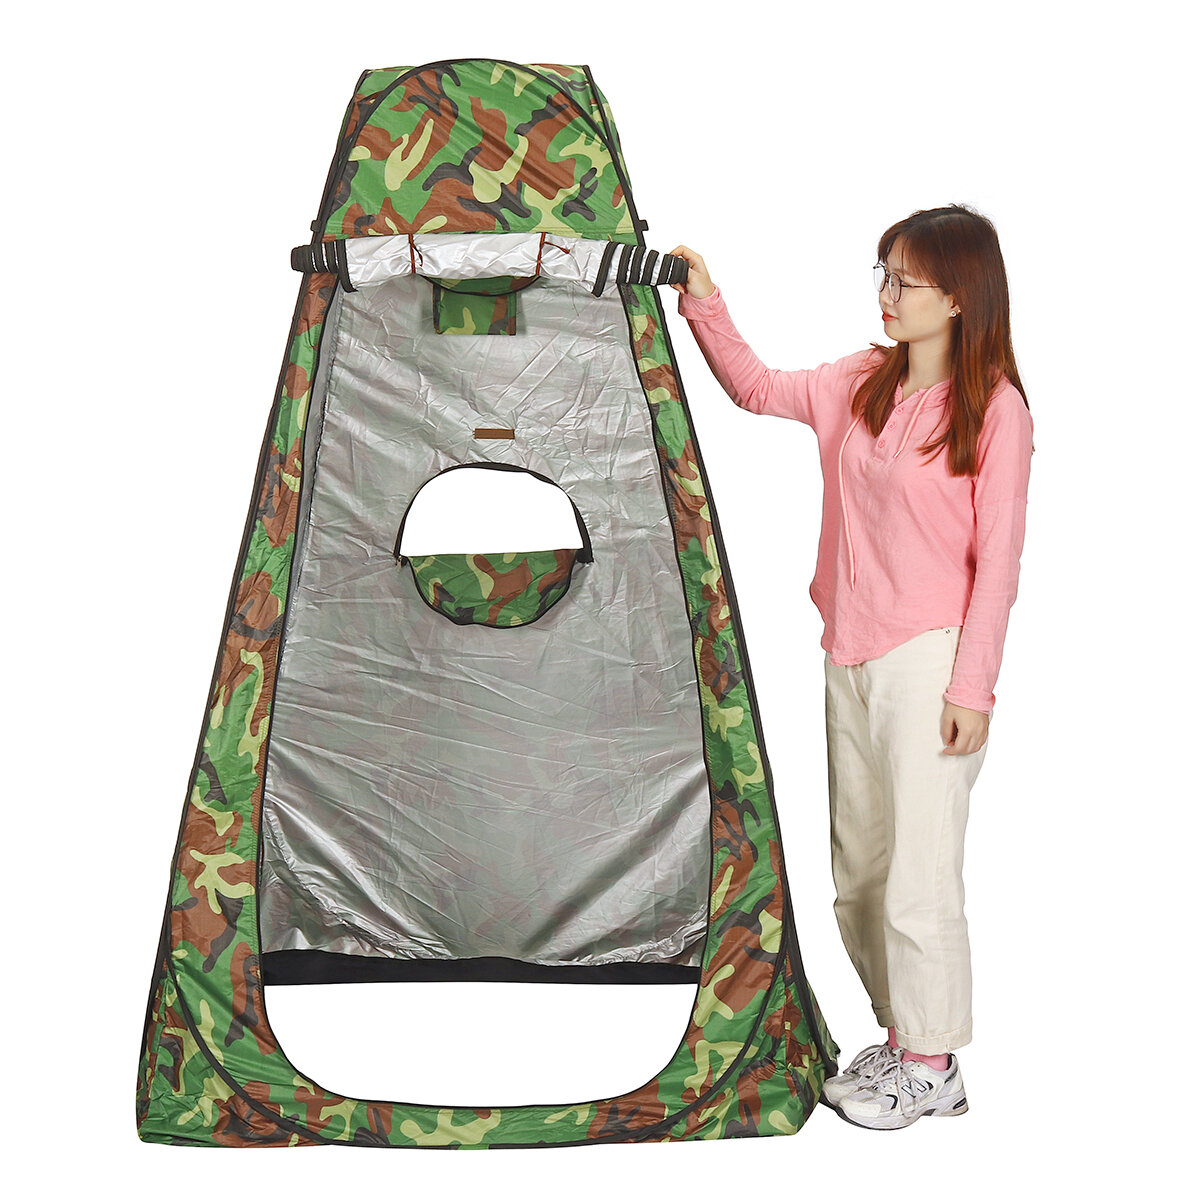 Single/Double Portable Pop-up Tent Camping Toilet Shower Dressing Privacy Room Tent Waterproof